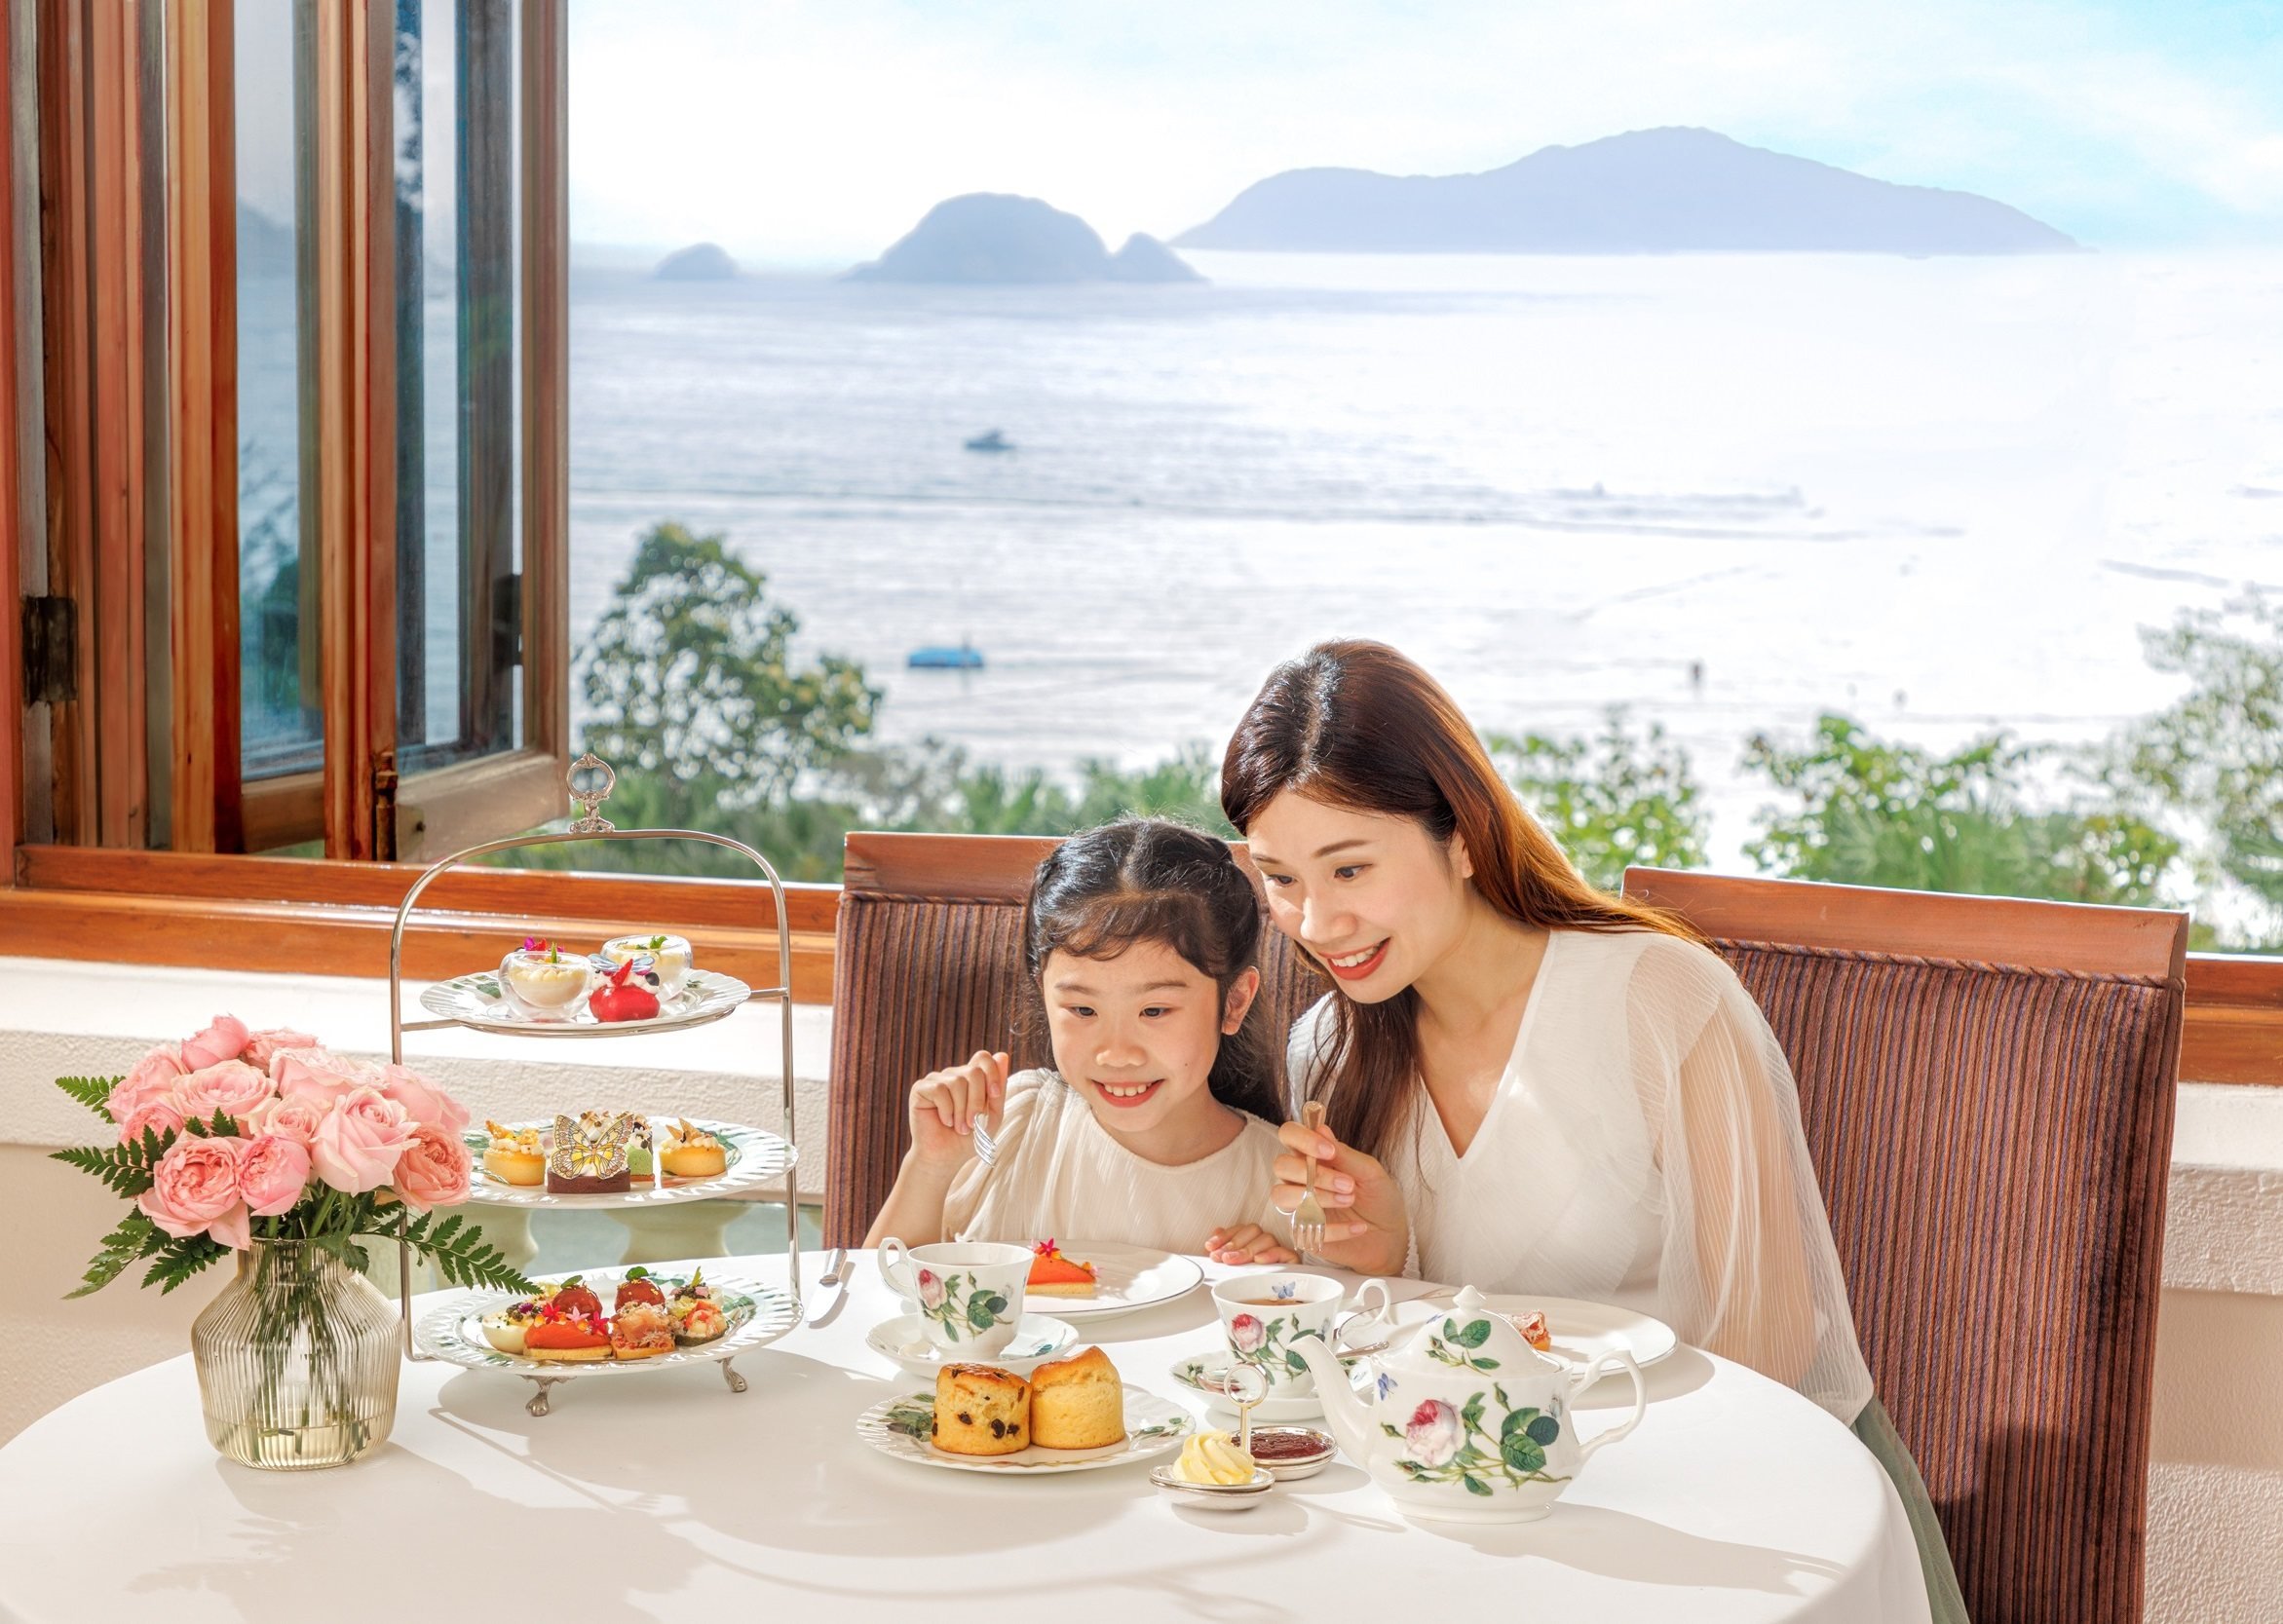 The Verandah at The Repulse Bay will serve a Mother’s Tribute Afternoon Tea from May 8 to 12. Photo: The Verandah